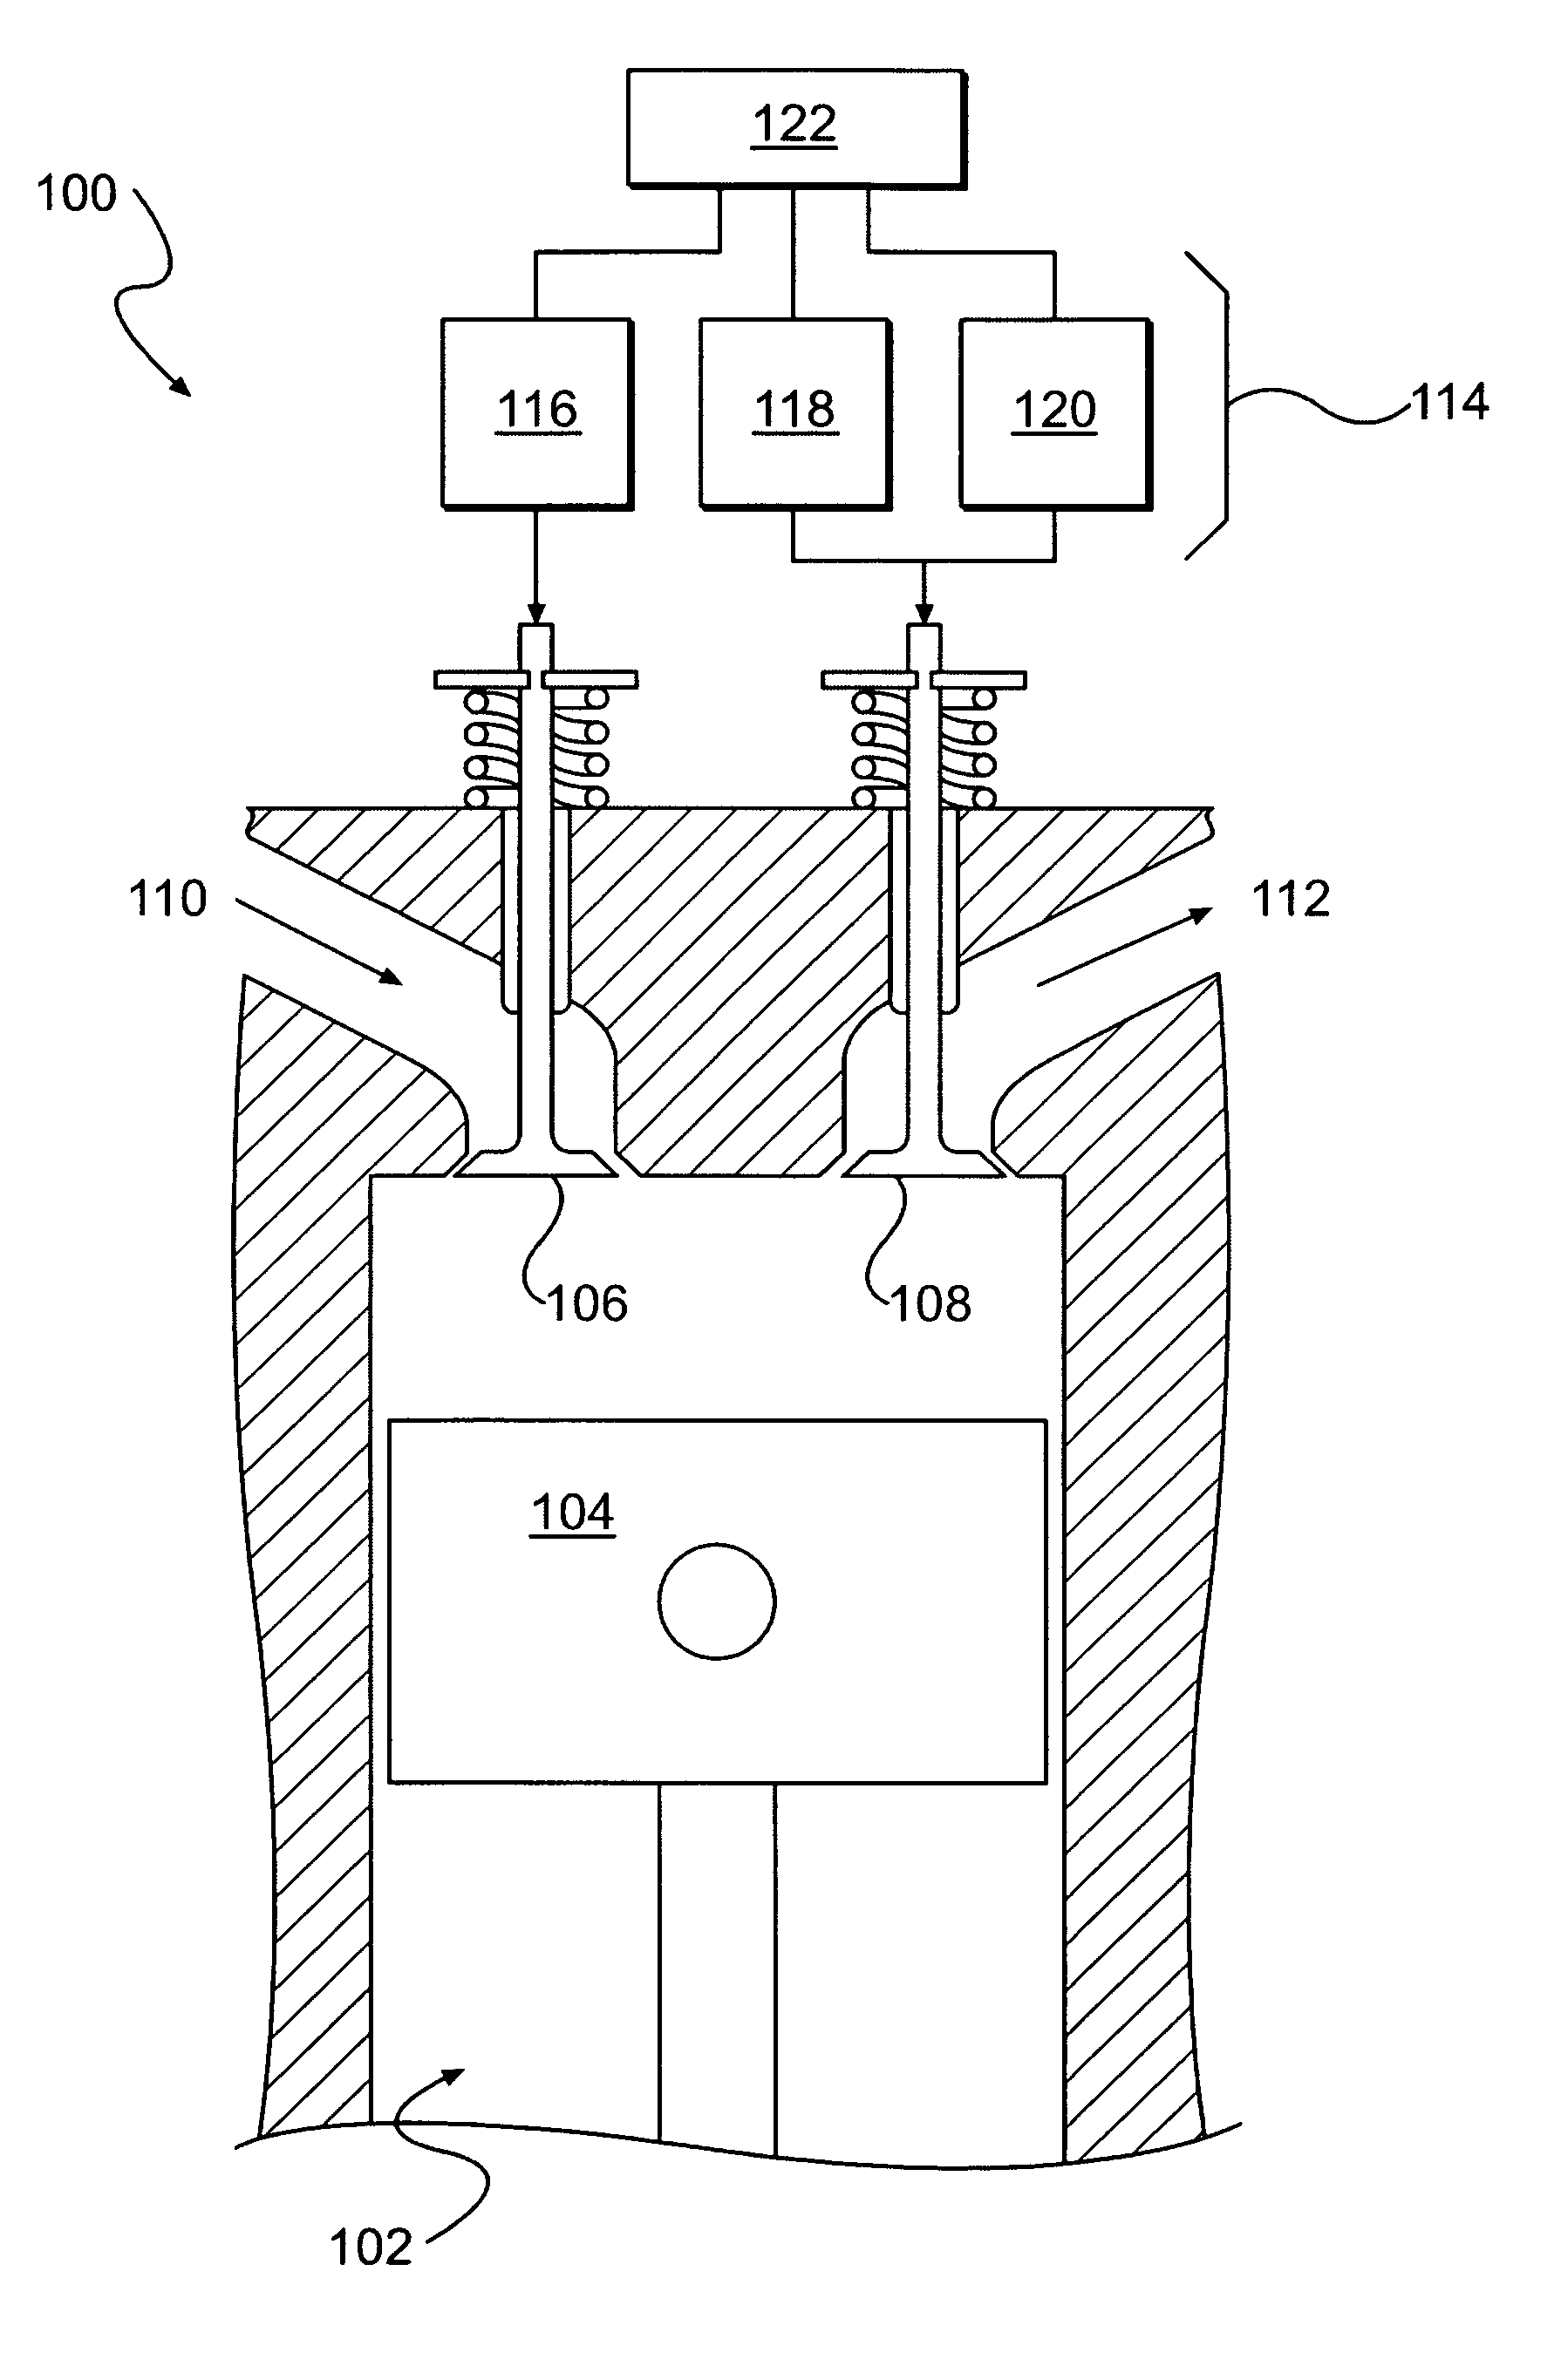 Method for variable valve actuation to provide positive power and engine braking